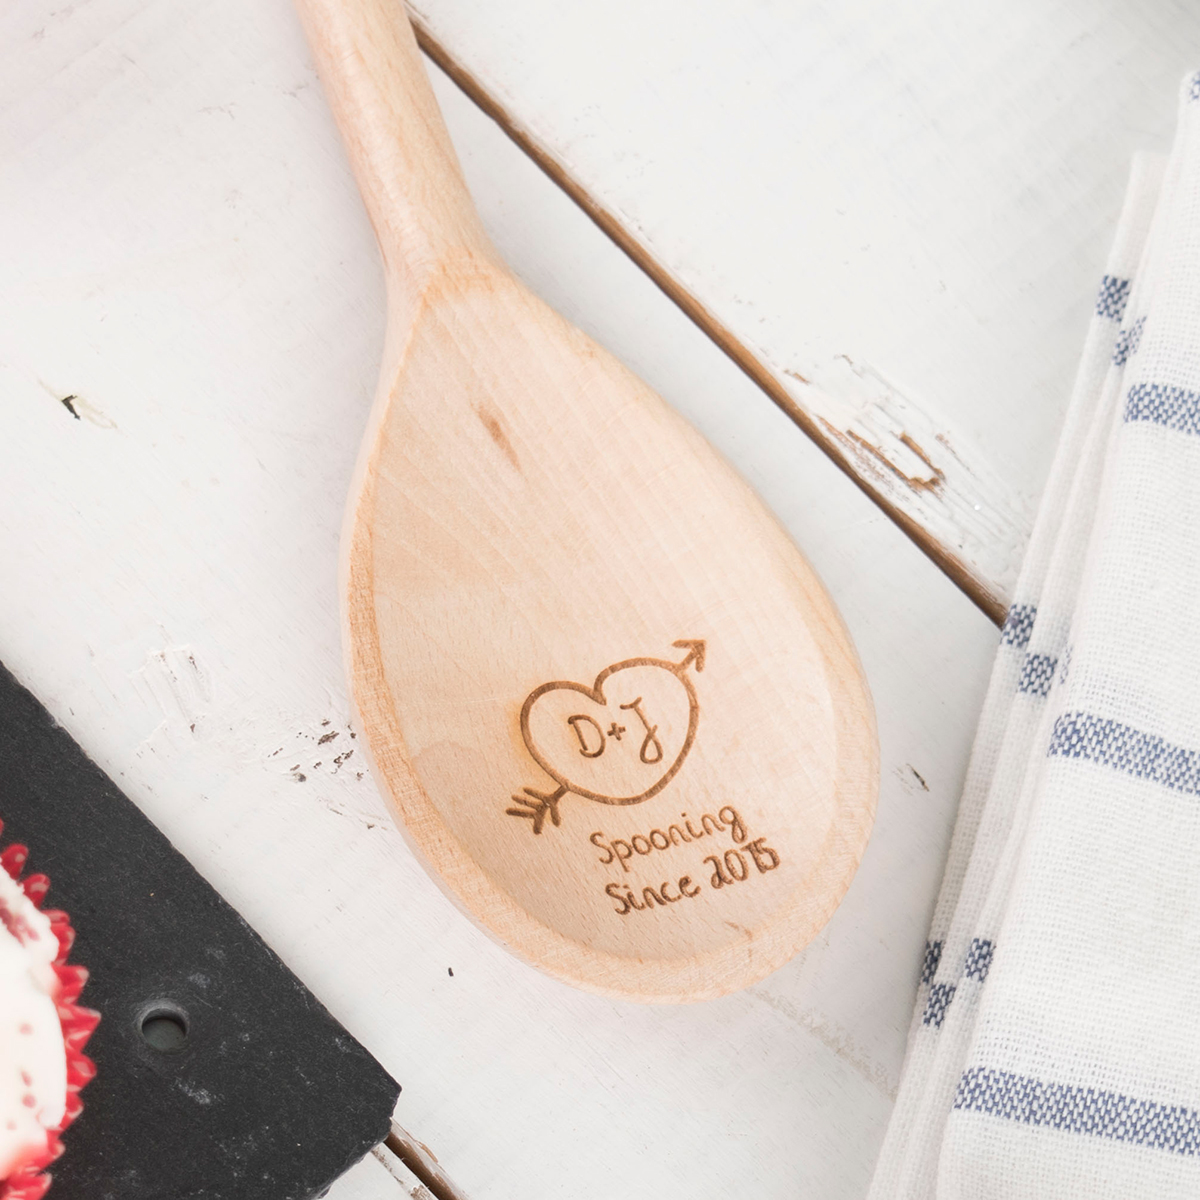 Engraved Wooden Spoon - Spooning Since